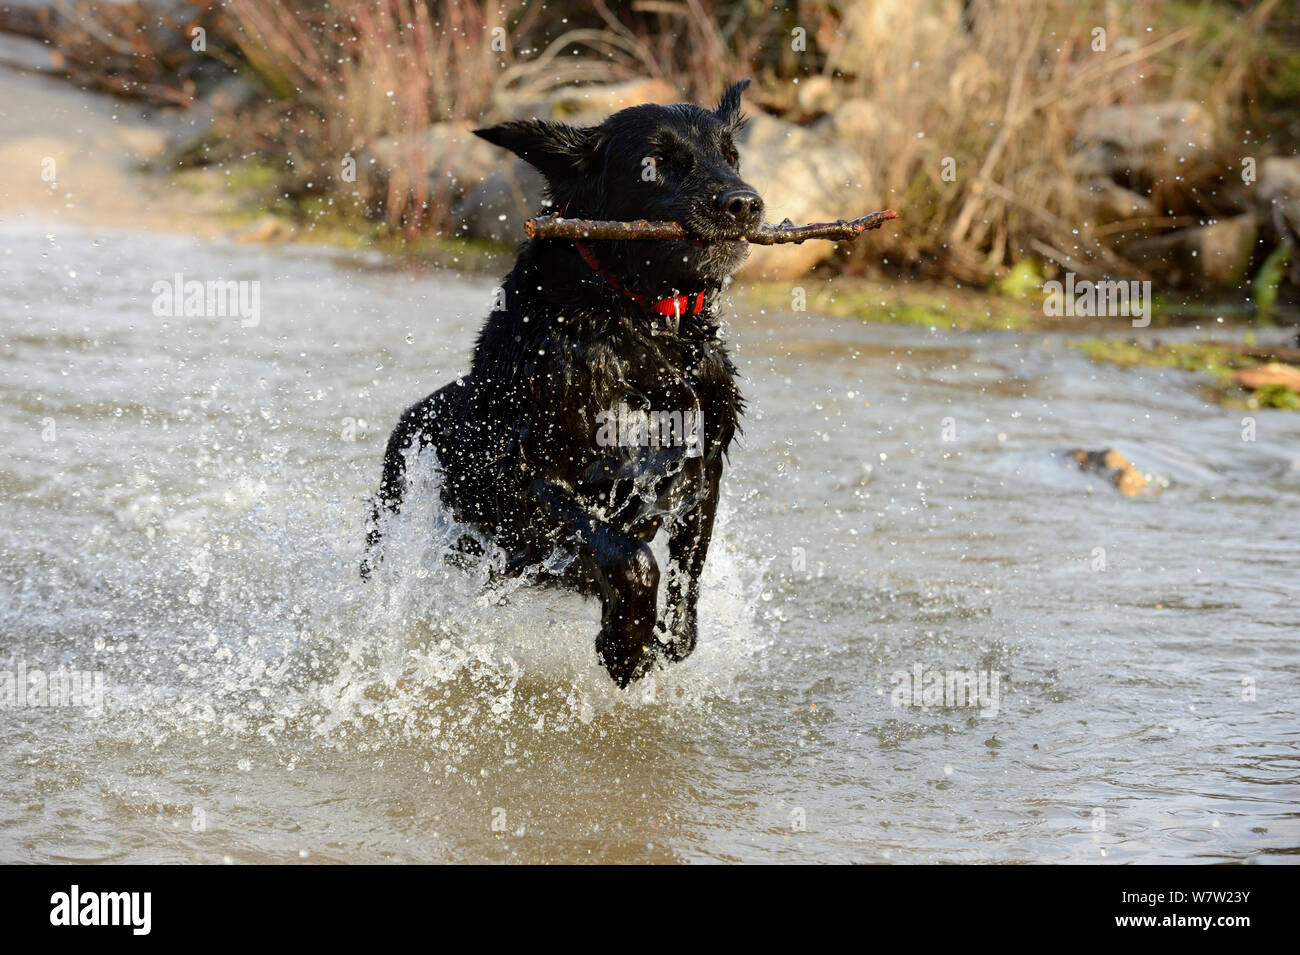 Black flat-coated retriever dog splashing in water and retrieving stick (Canis familiaris) Stock Photo